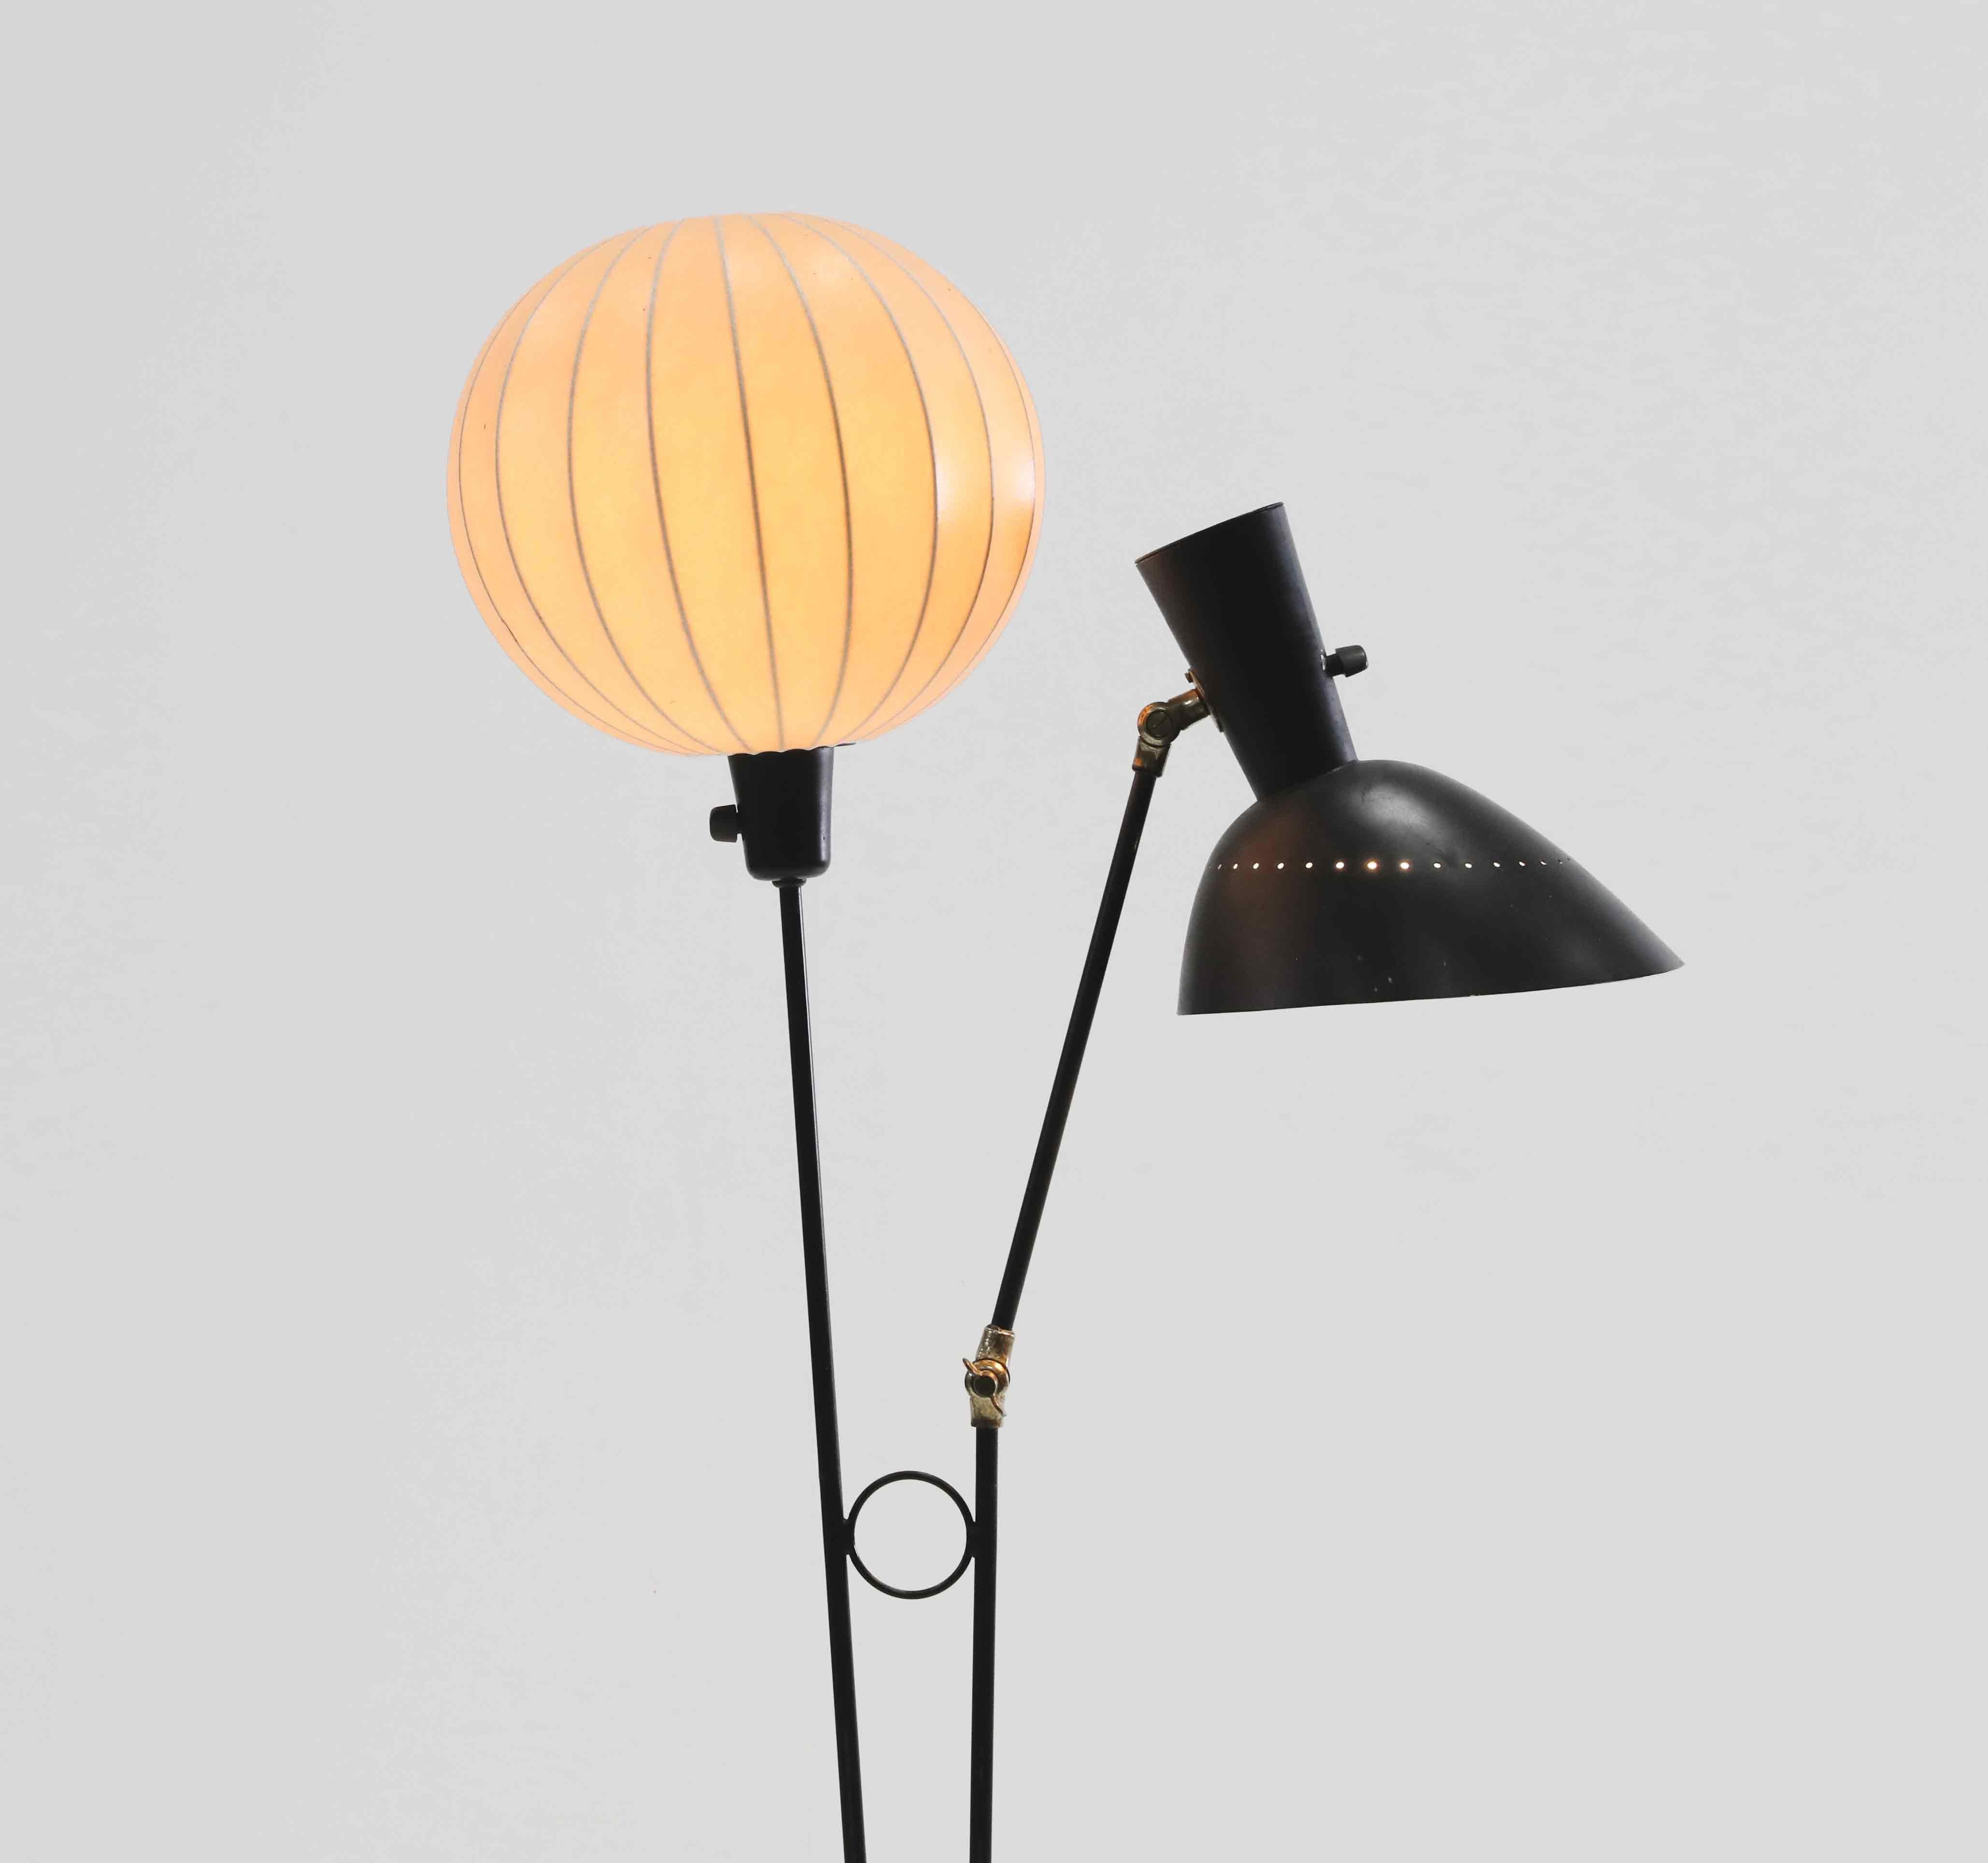 Painted Rare Floor Lamp by Hans Bergström for Ateljé Lyktan from the 1950s For Sale